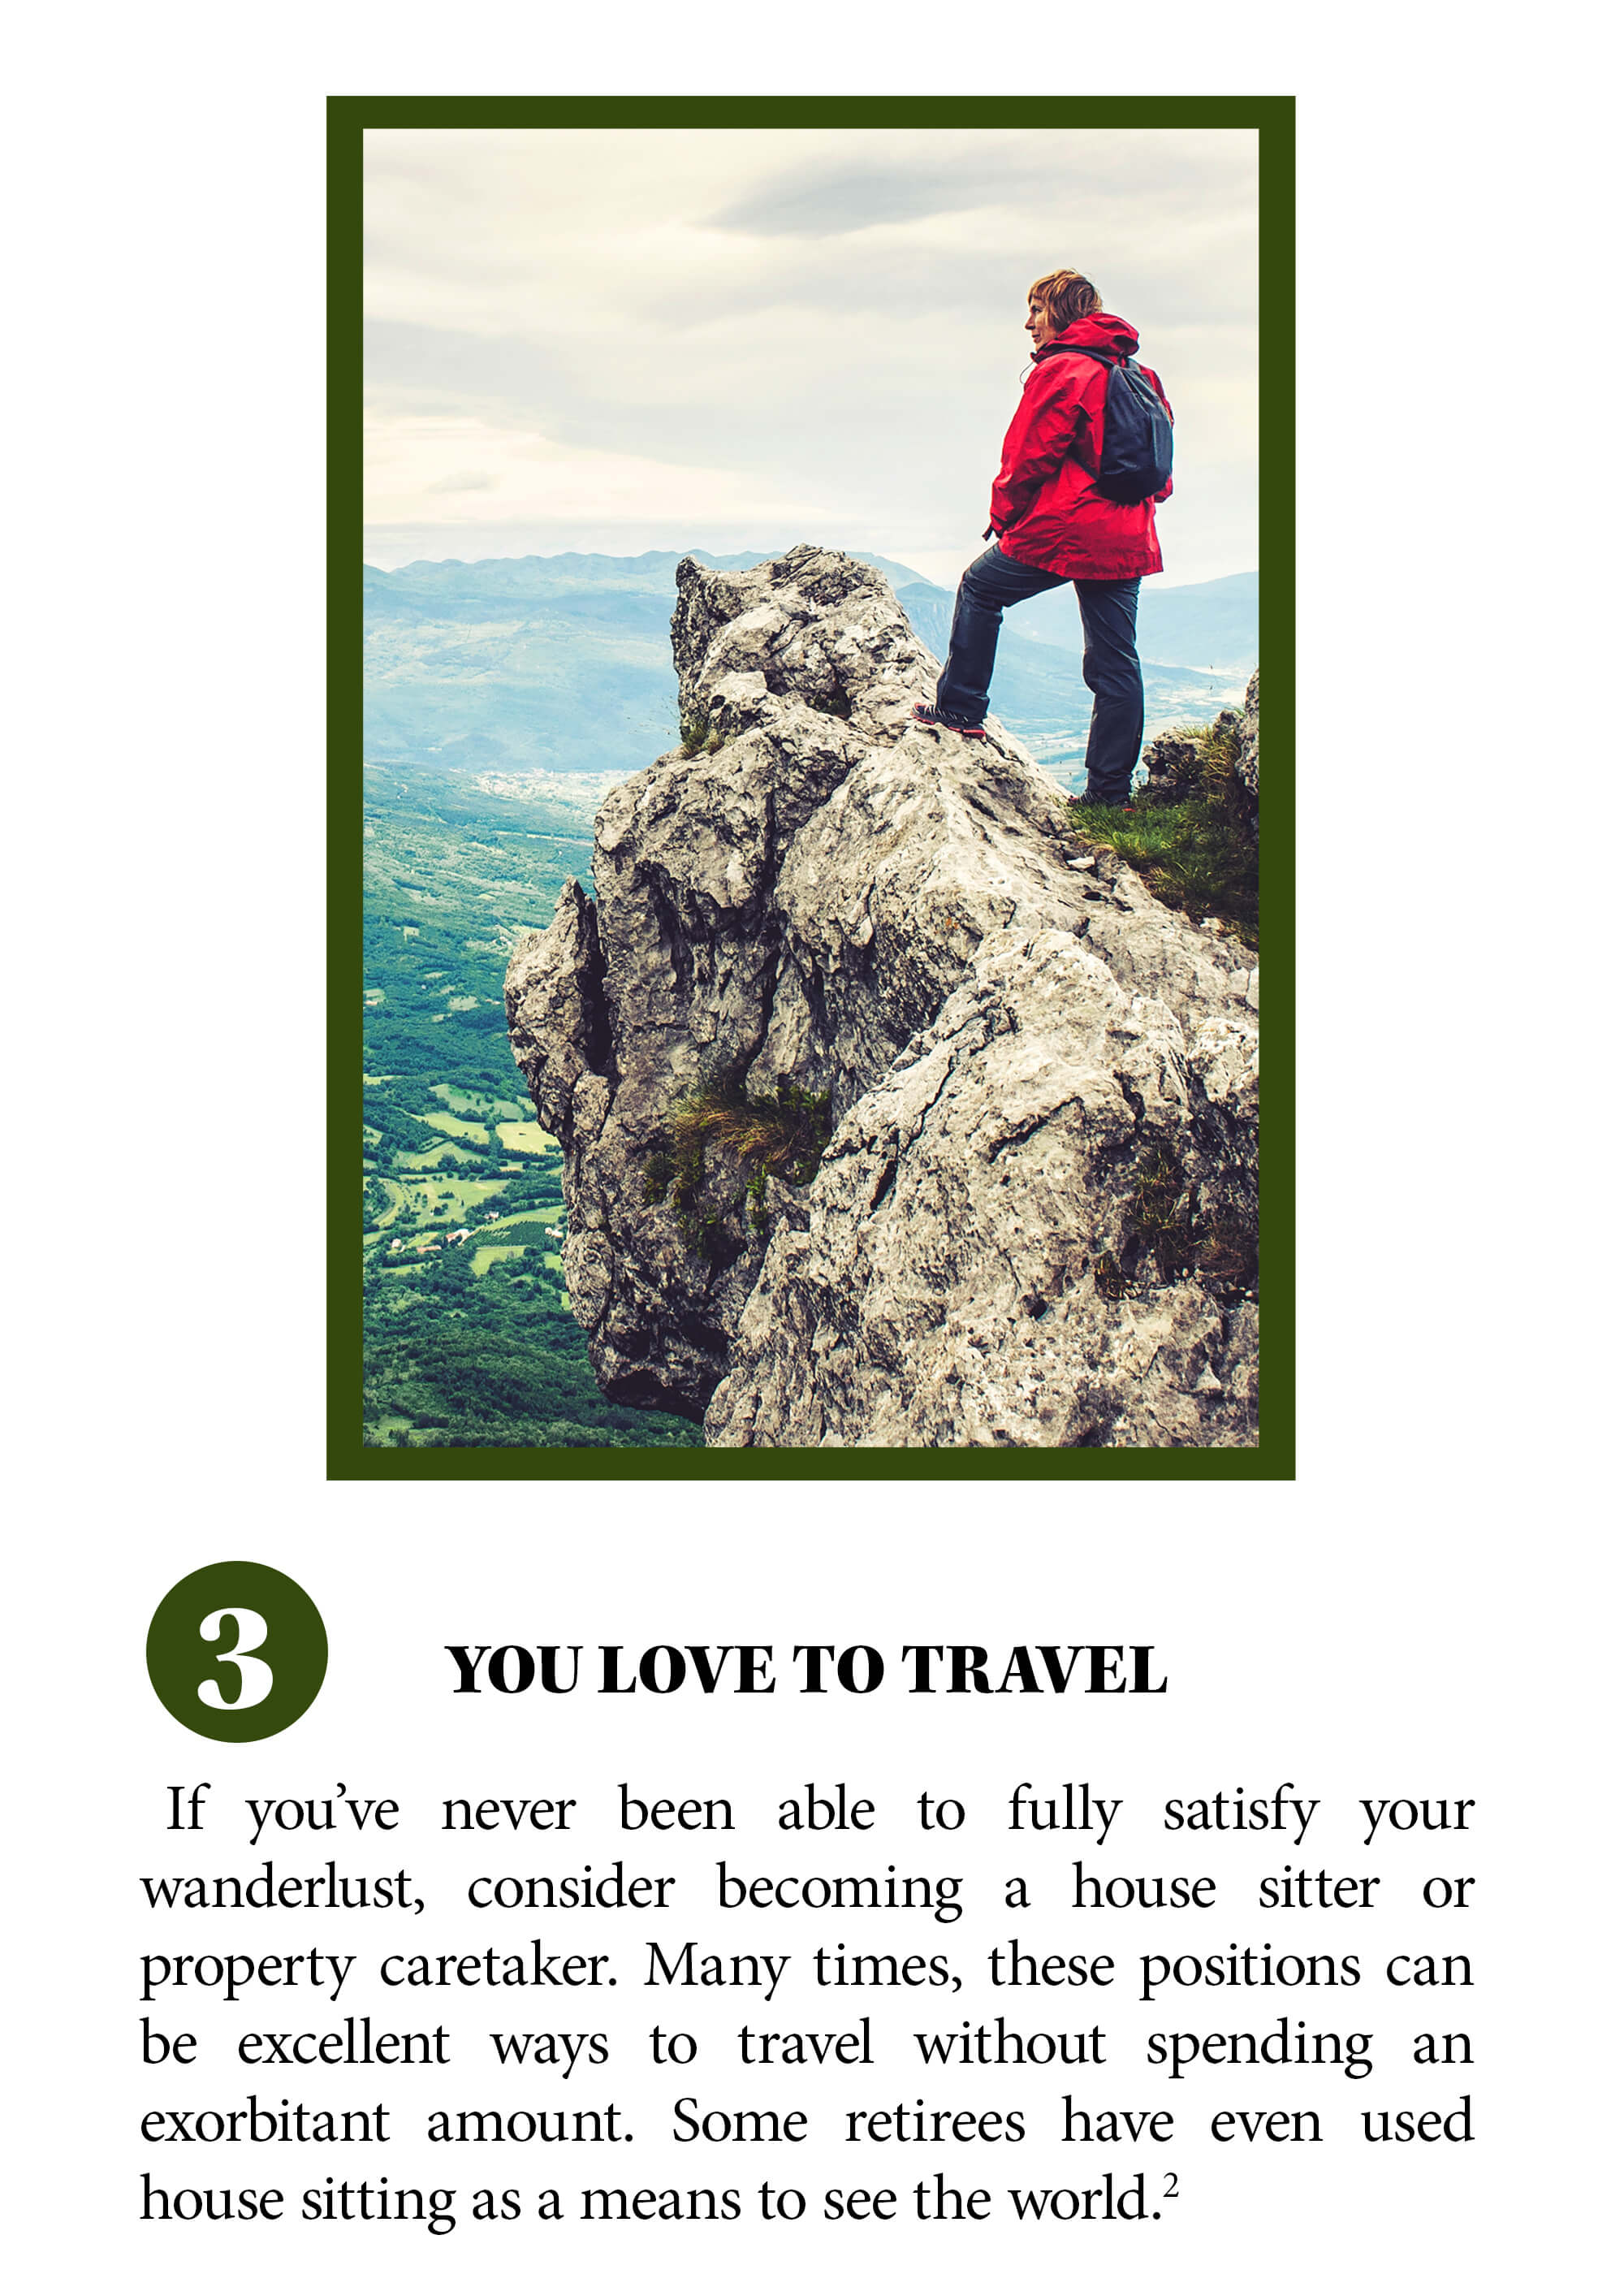 You love to travel. If you’ve never been able to fully satisfy your wanderlust, consider becoming a house sitter or property caretaker. Many times, these positions can be excellent ways to travel without spending an exorbitant amount. Some retirees have even used house sitting as a means to see the world. Source 2.